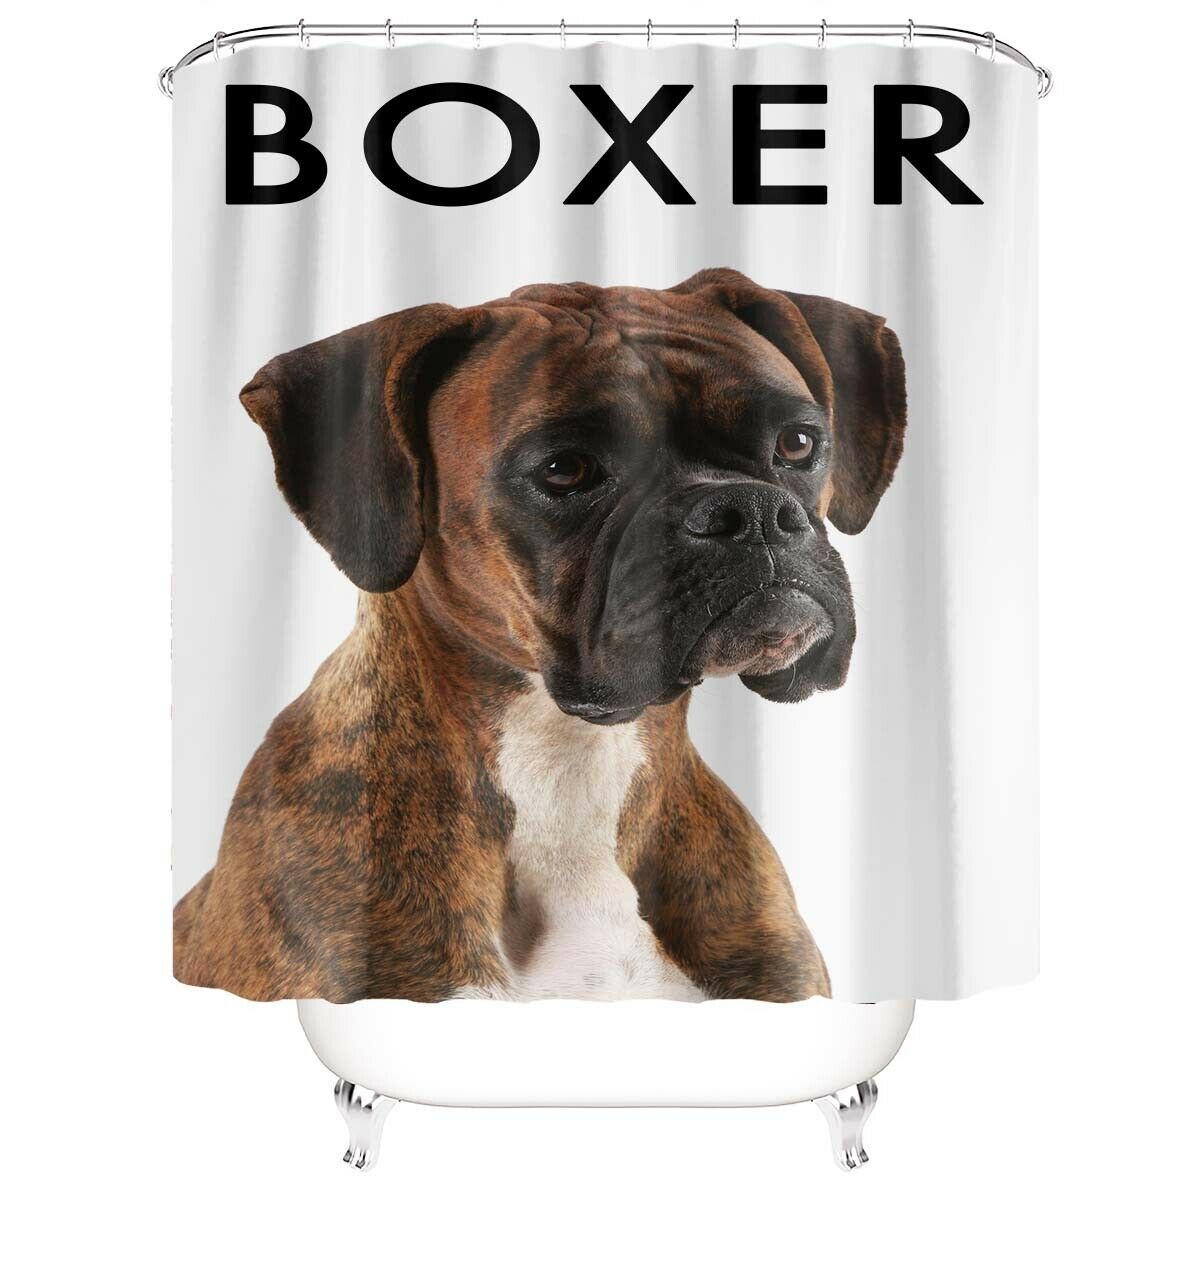 Boxer Shower Curtain Bathroom Rug Set Thick Bath Mat Non-Slip Toilet Lid Cover-180×180cm Shower Curtain Only-Free Shipping at meselling99